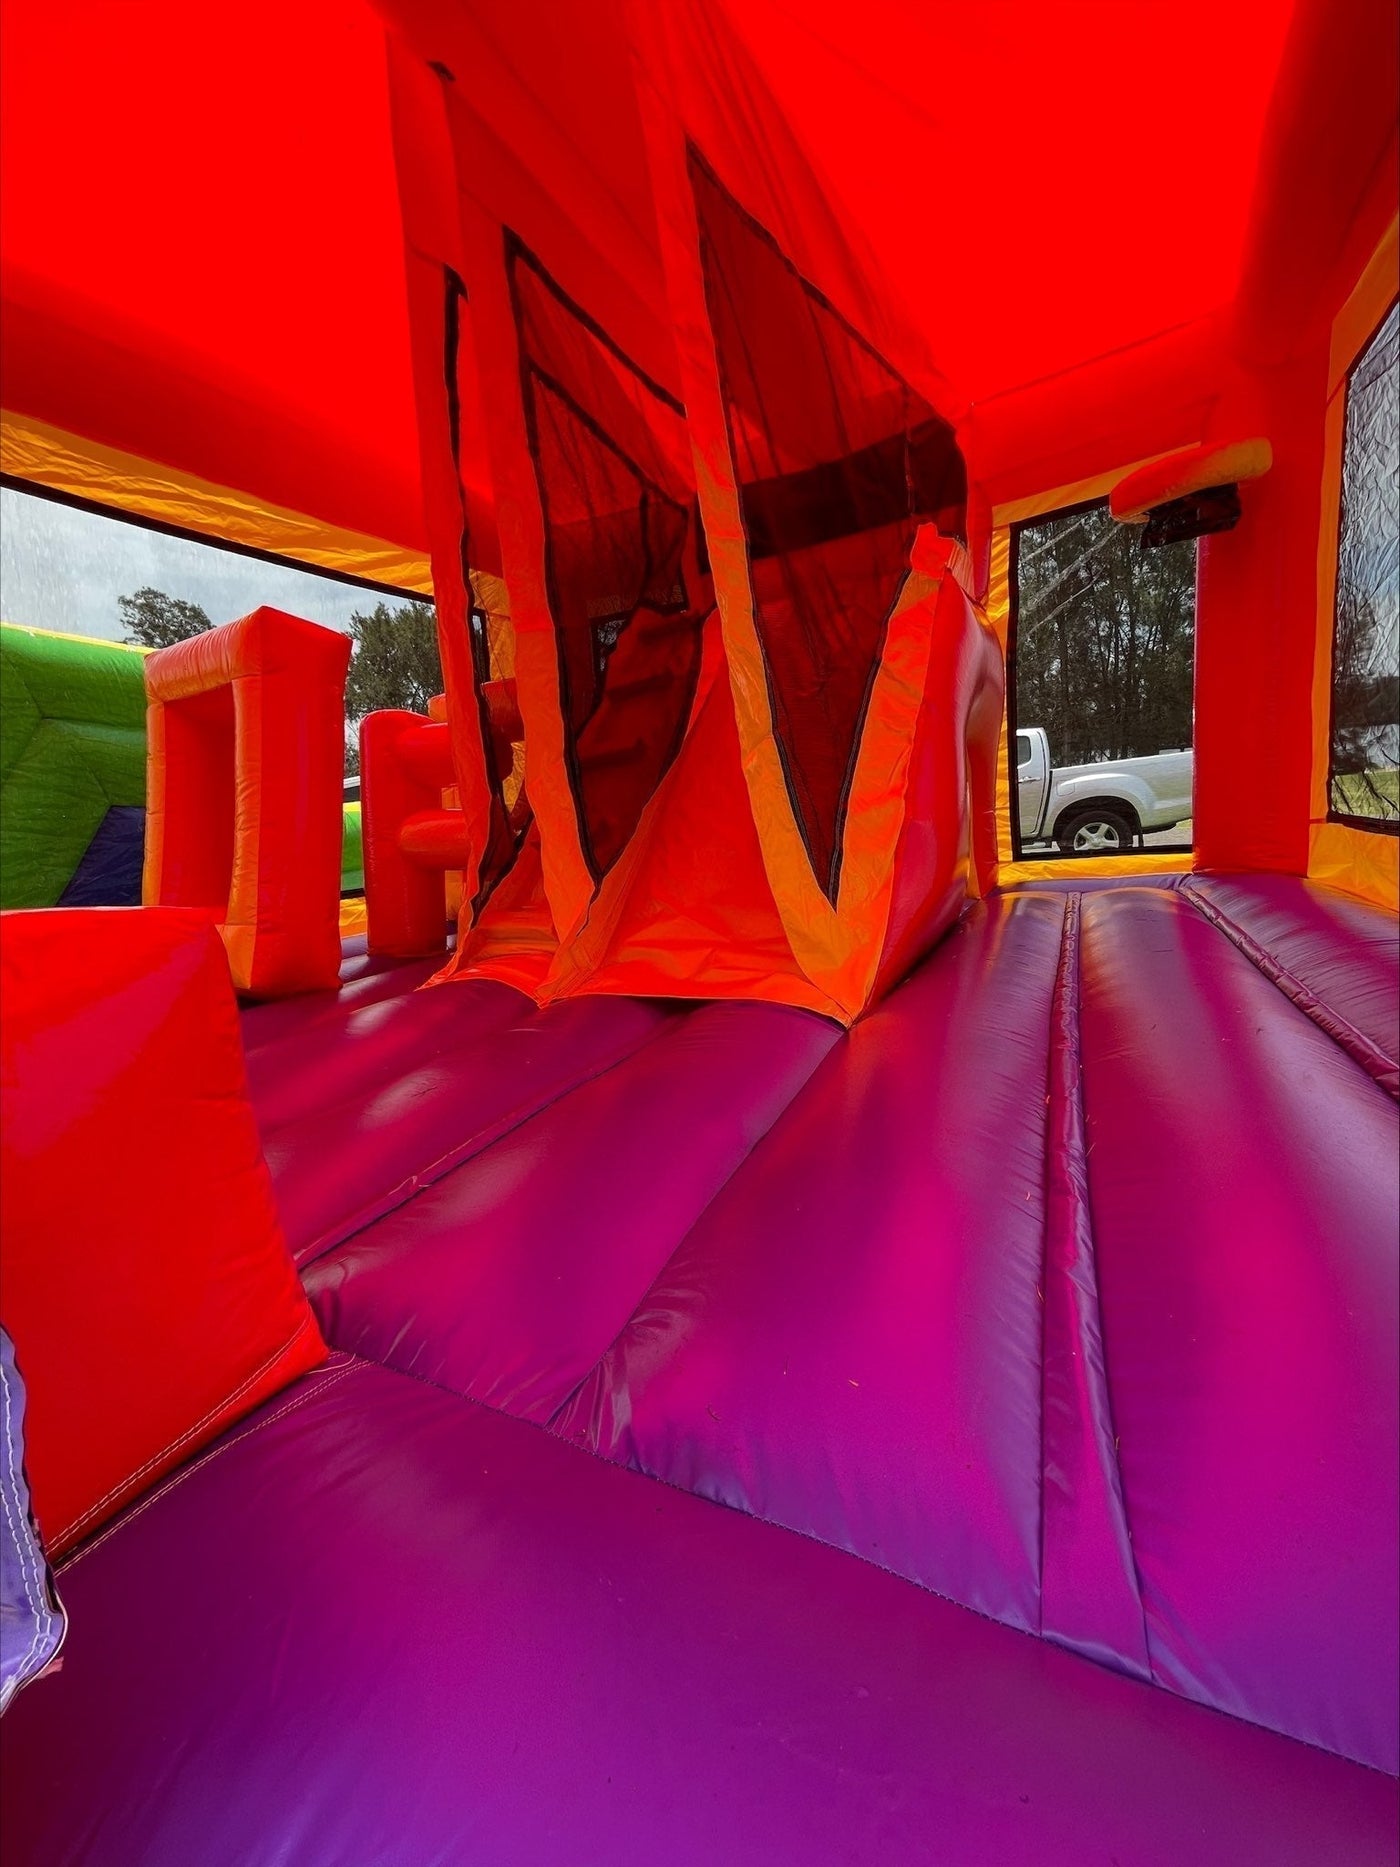 Alice in Wonderland #1 Extra Large Obstacle Combo Jumping Castle